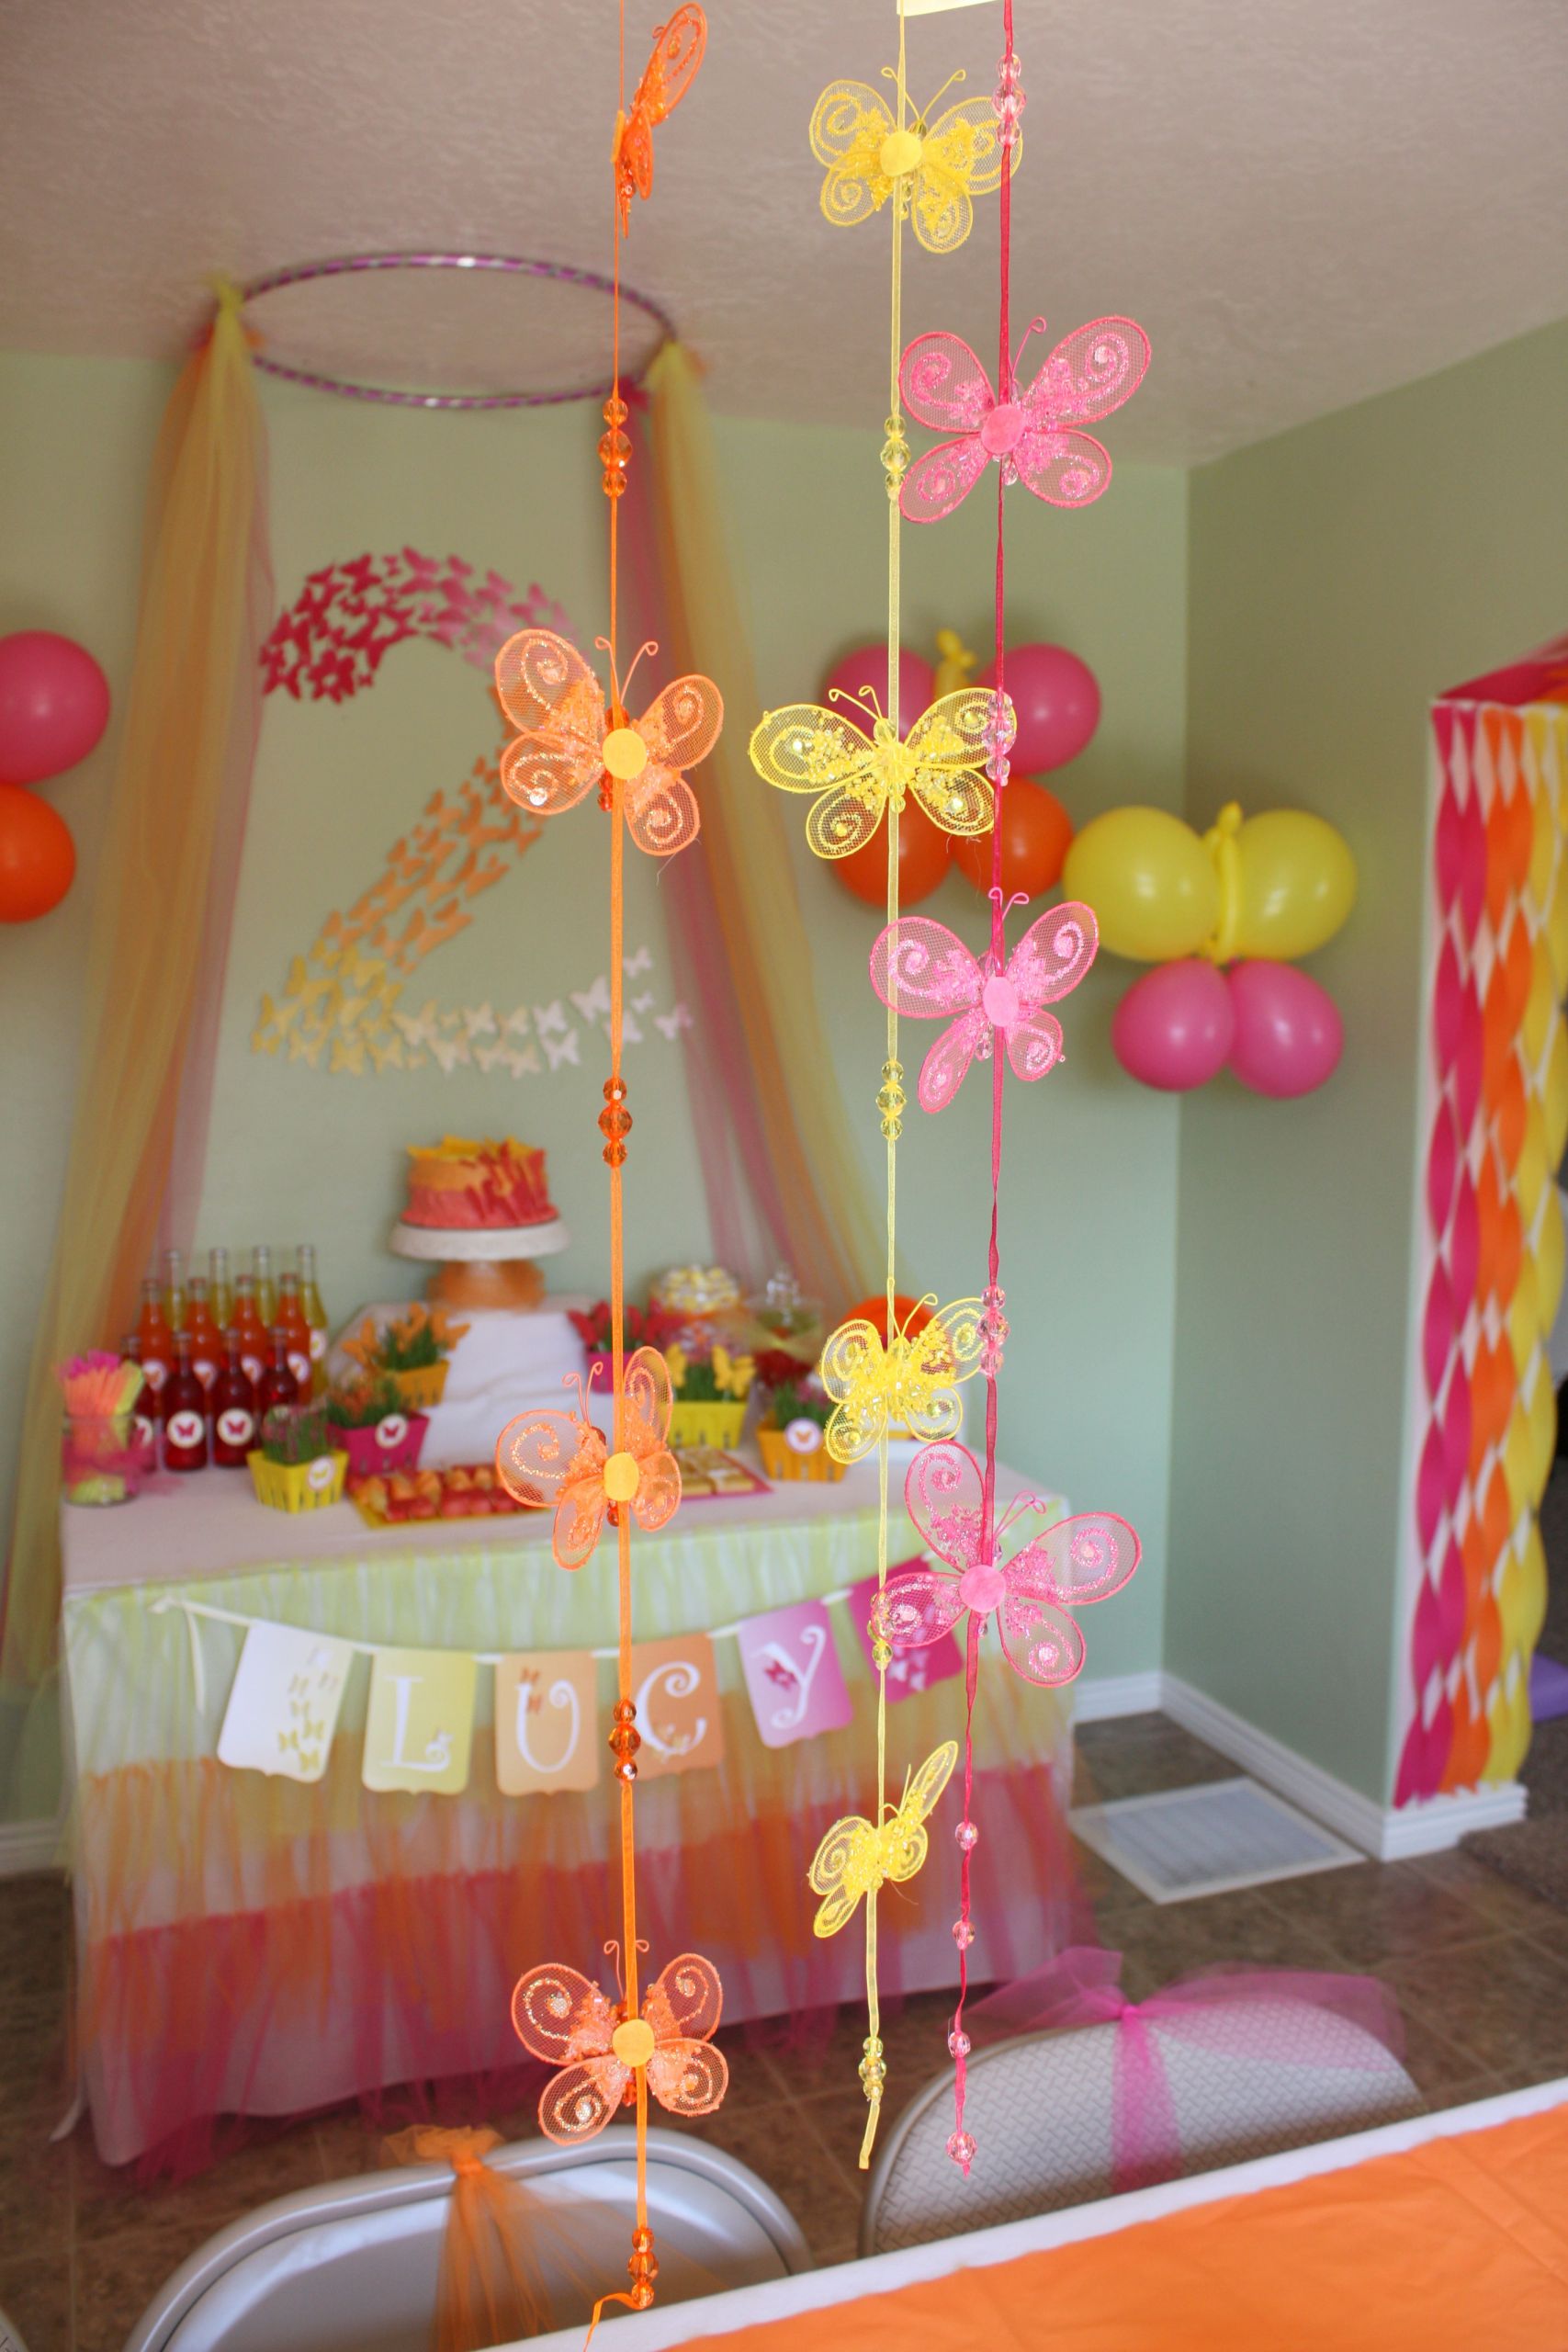 Table Decorations For Birthday Party
 Butterfly Themed Birthday Party Decorations events to